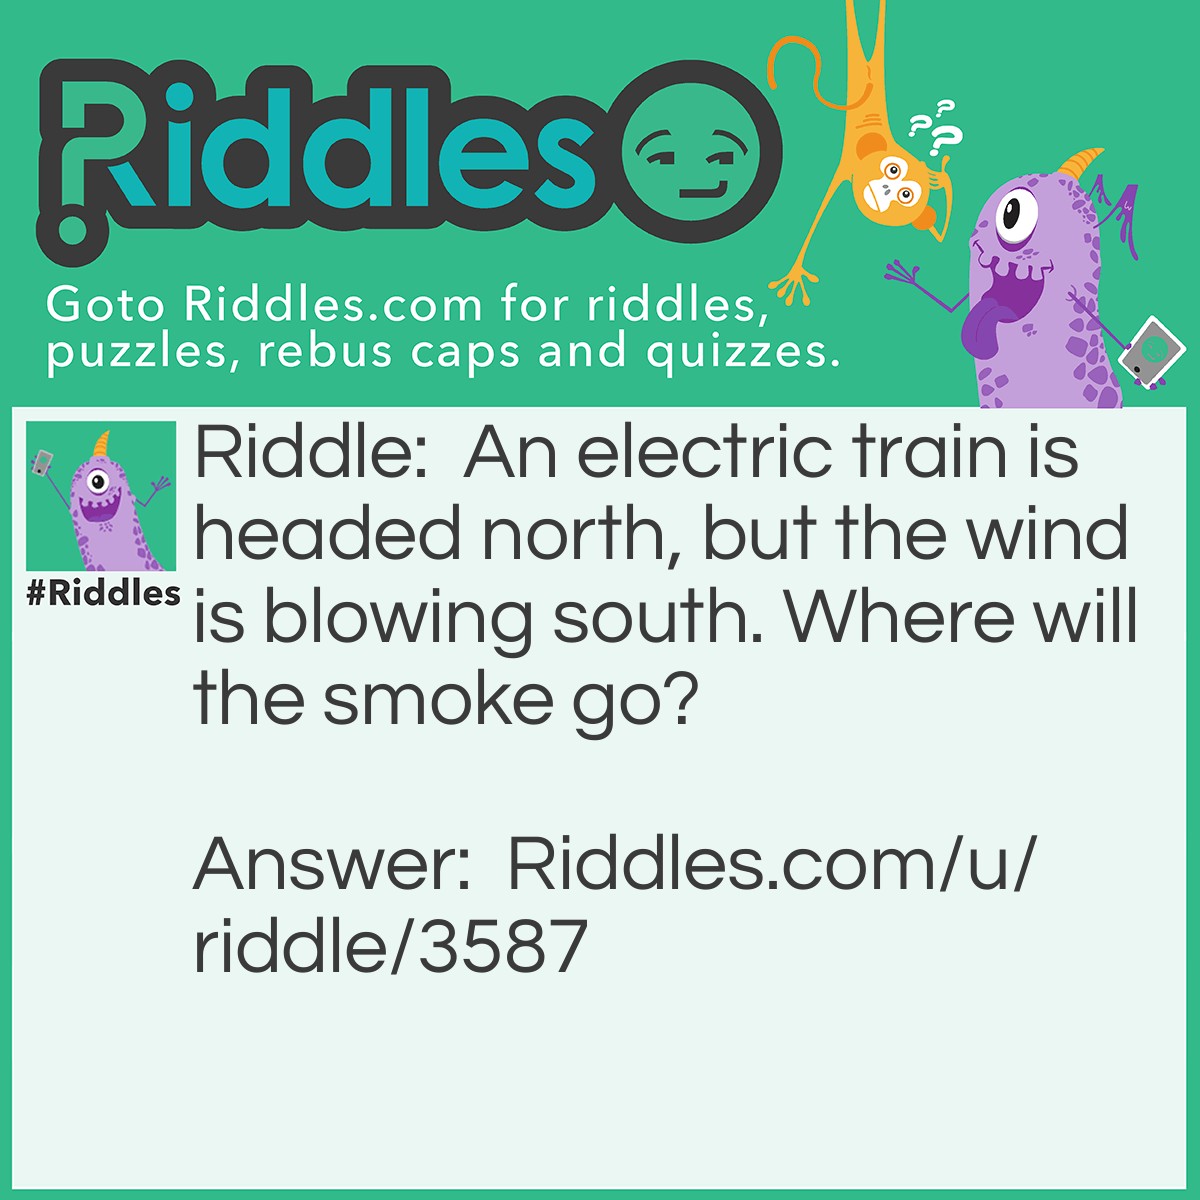 Riddle: An electric train is headed north, but the wind is blowing south. Where will the smoke go? Answer: Nowhere. An electric train doesn't have smoke!